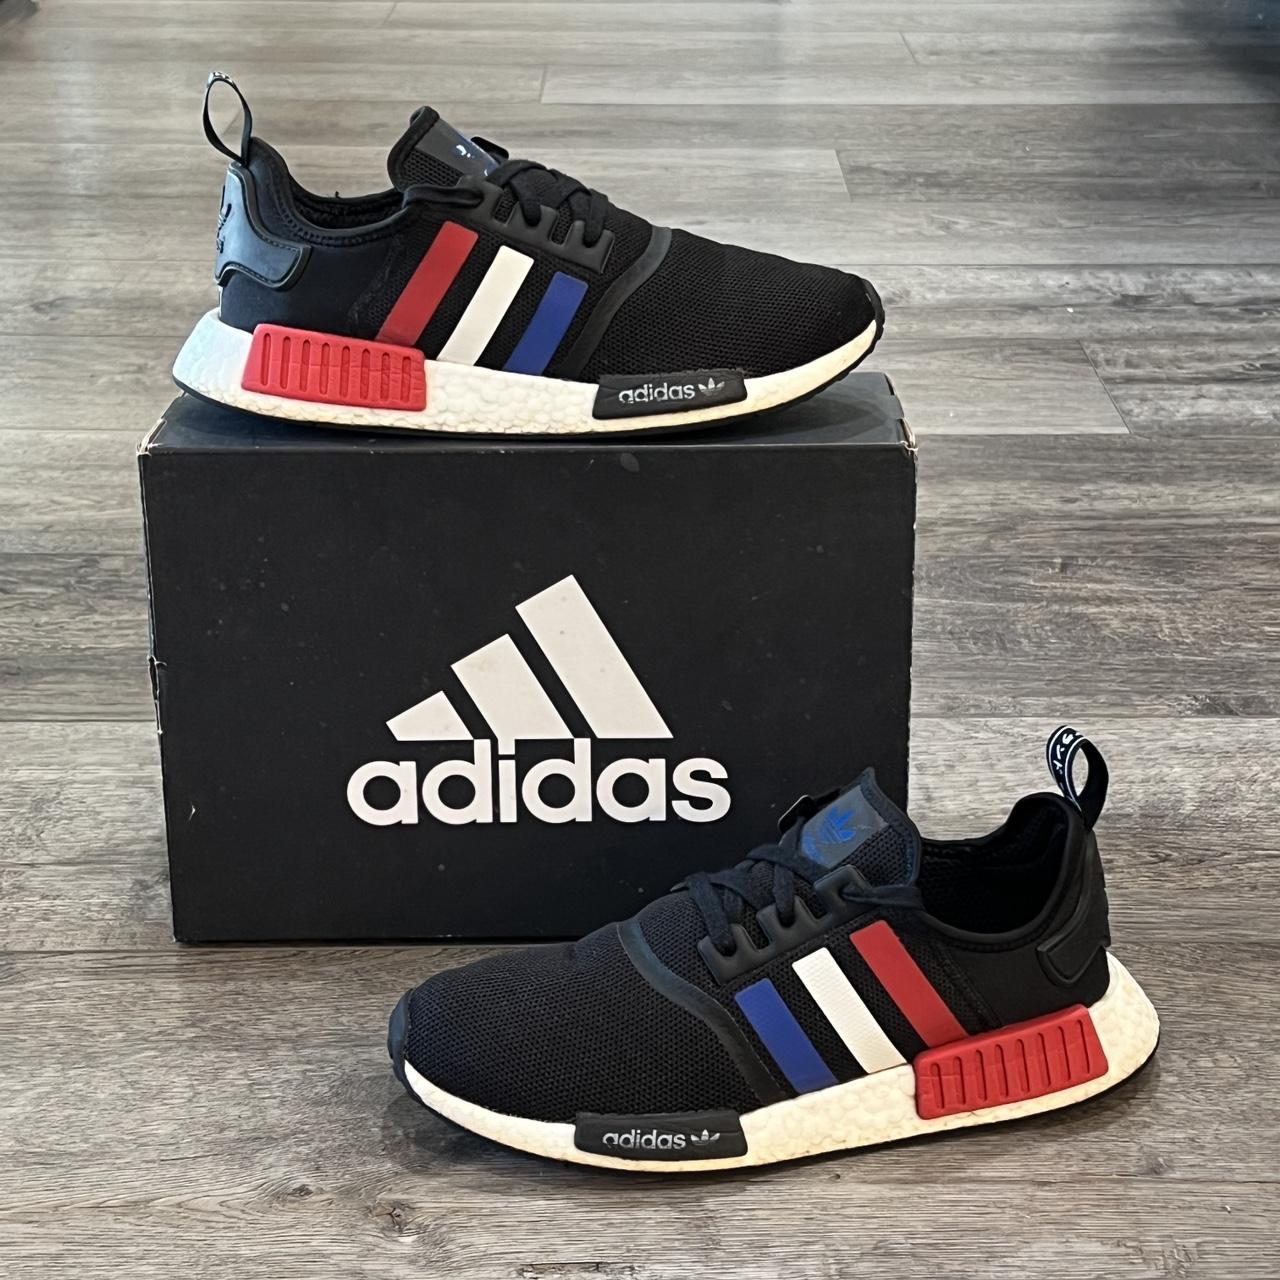 Adidas NMD R1 Tri Color' Sneakers in Men's... -